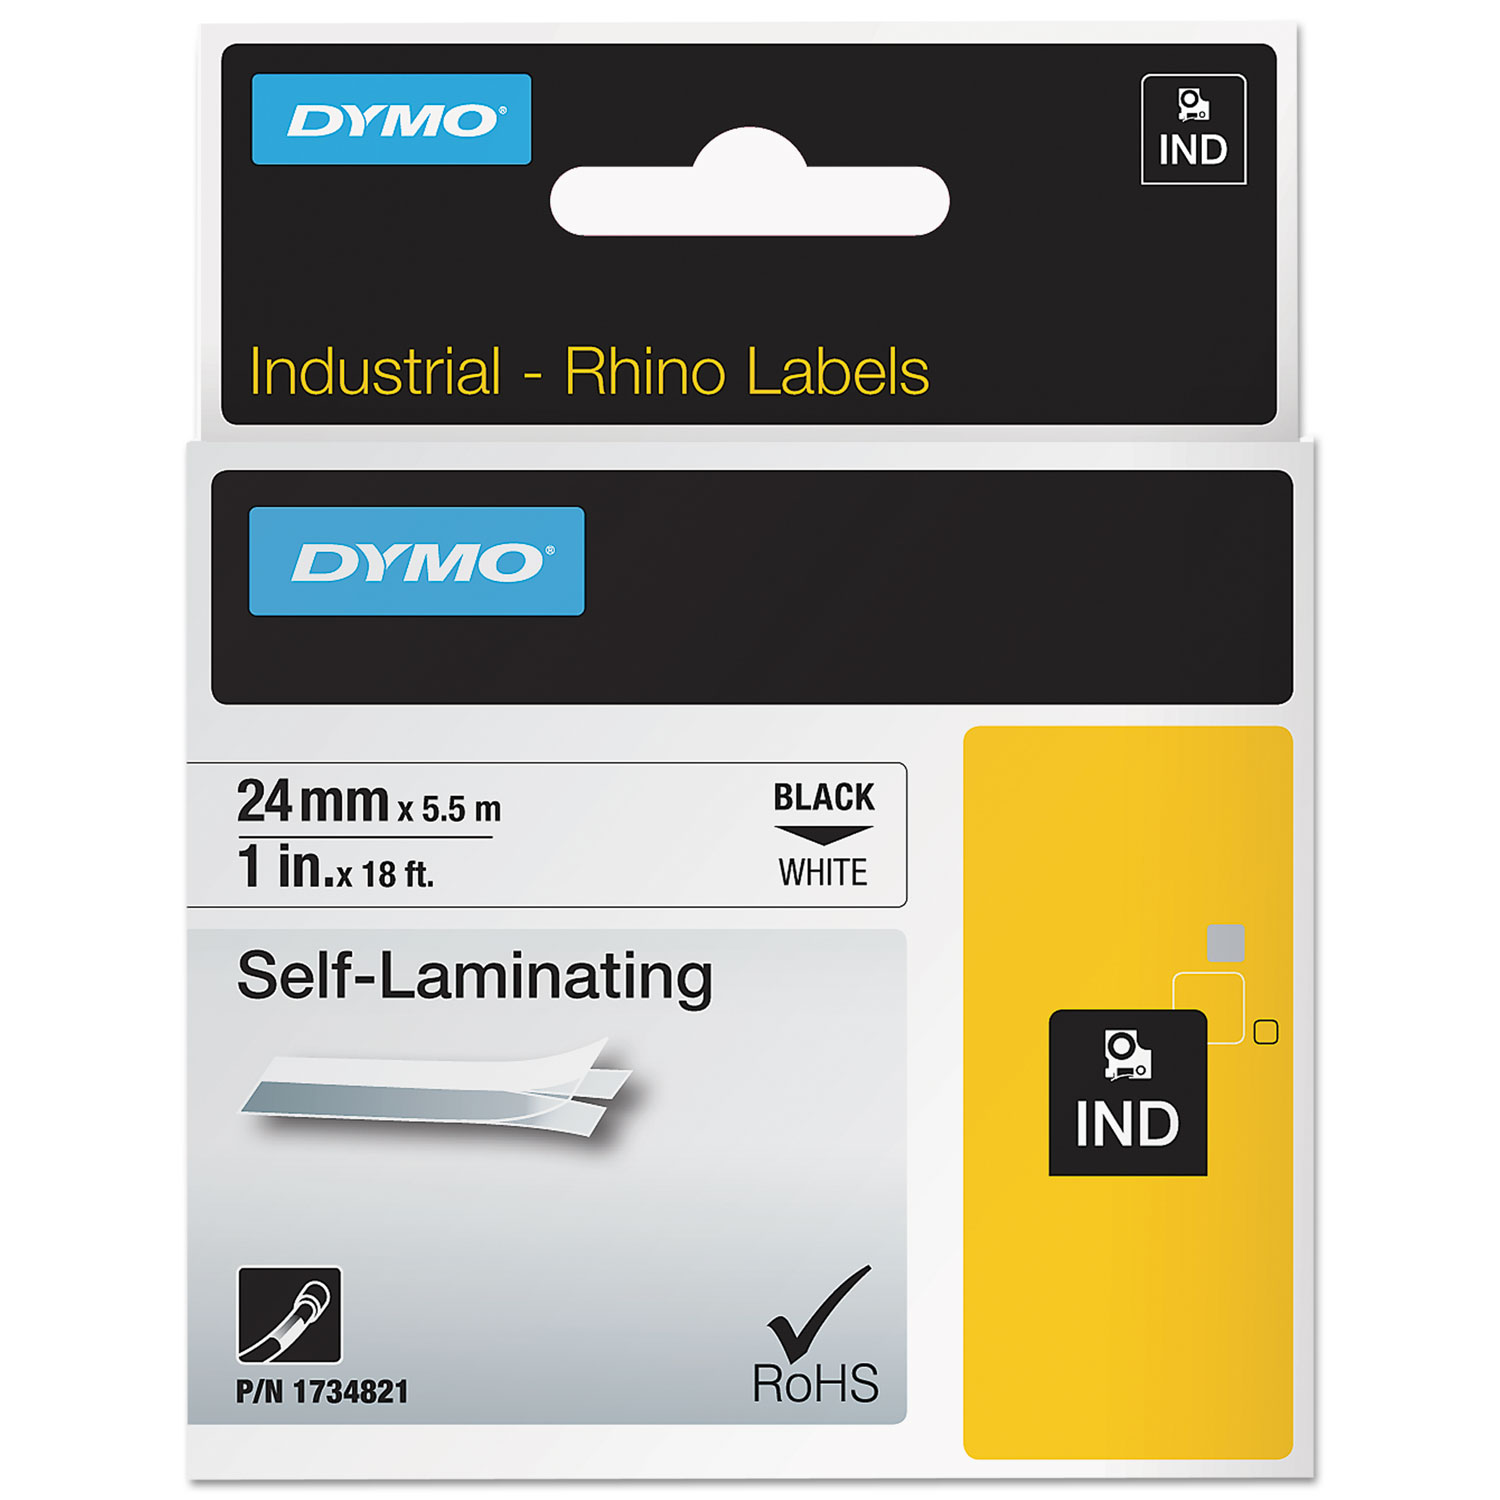  DYMO 1734821 Industrial Self-Laminating Labels, 1 x 18 ft, White (DYM1734821) 